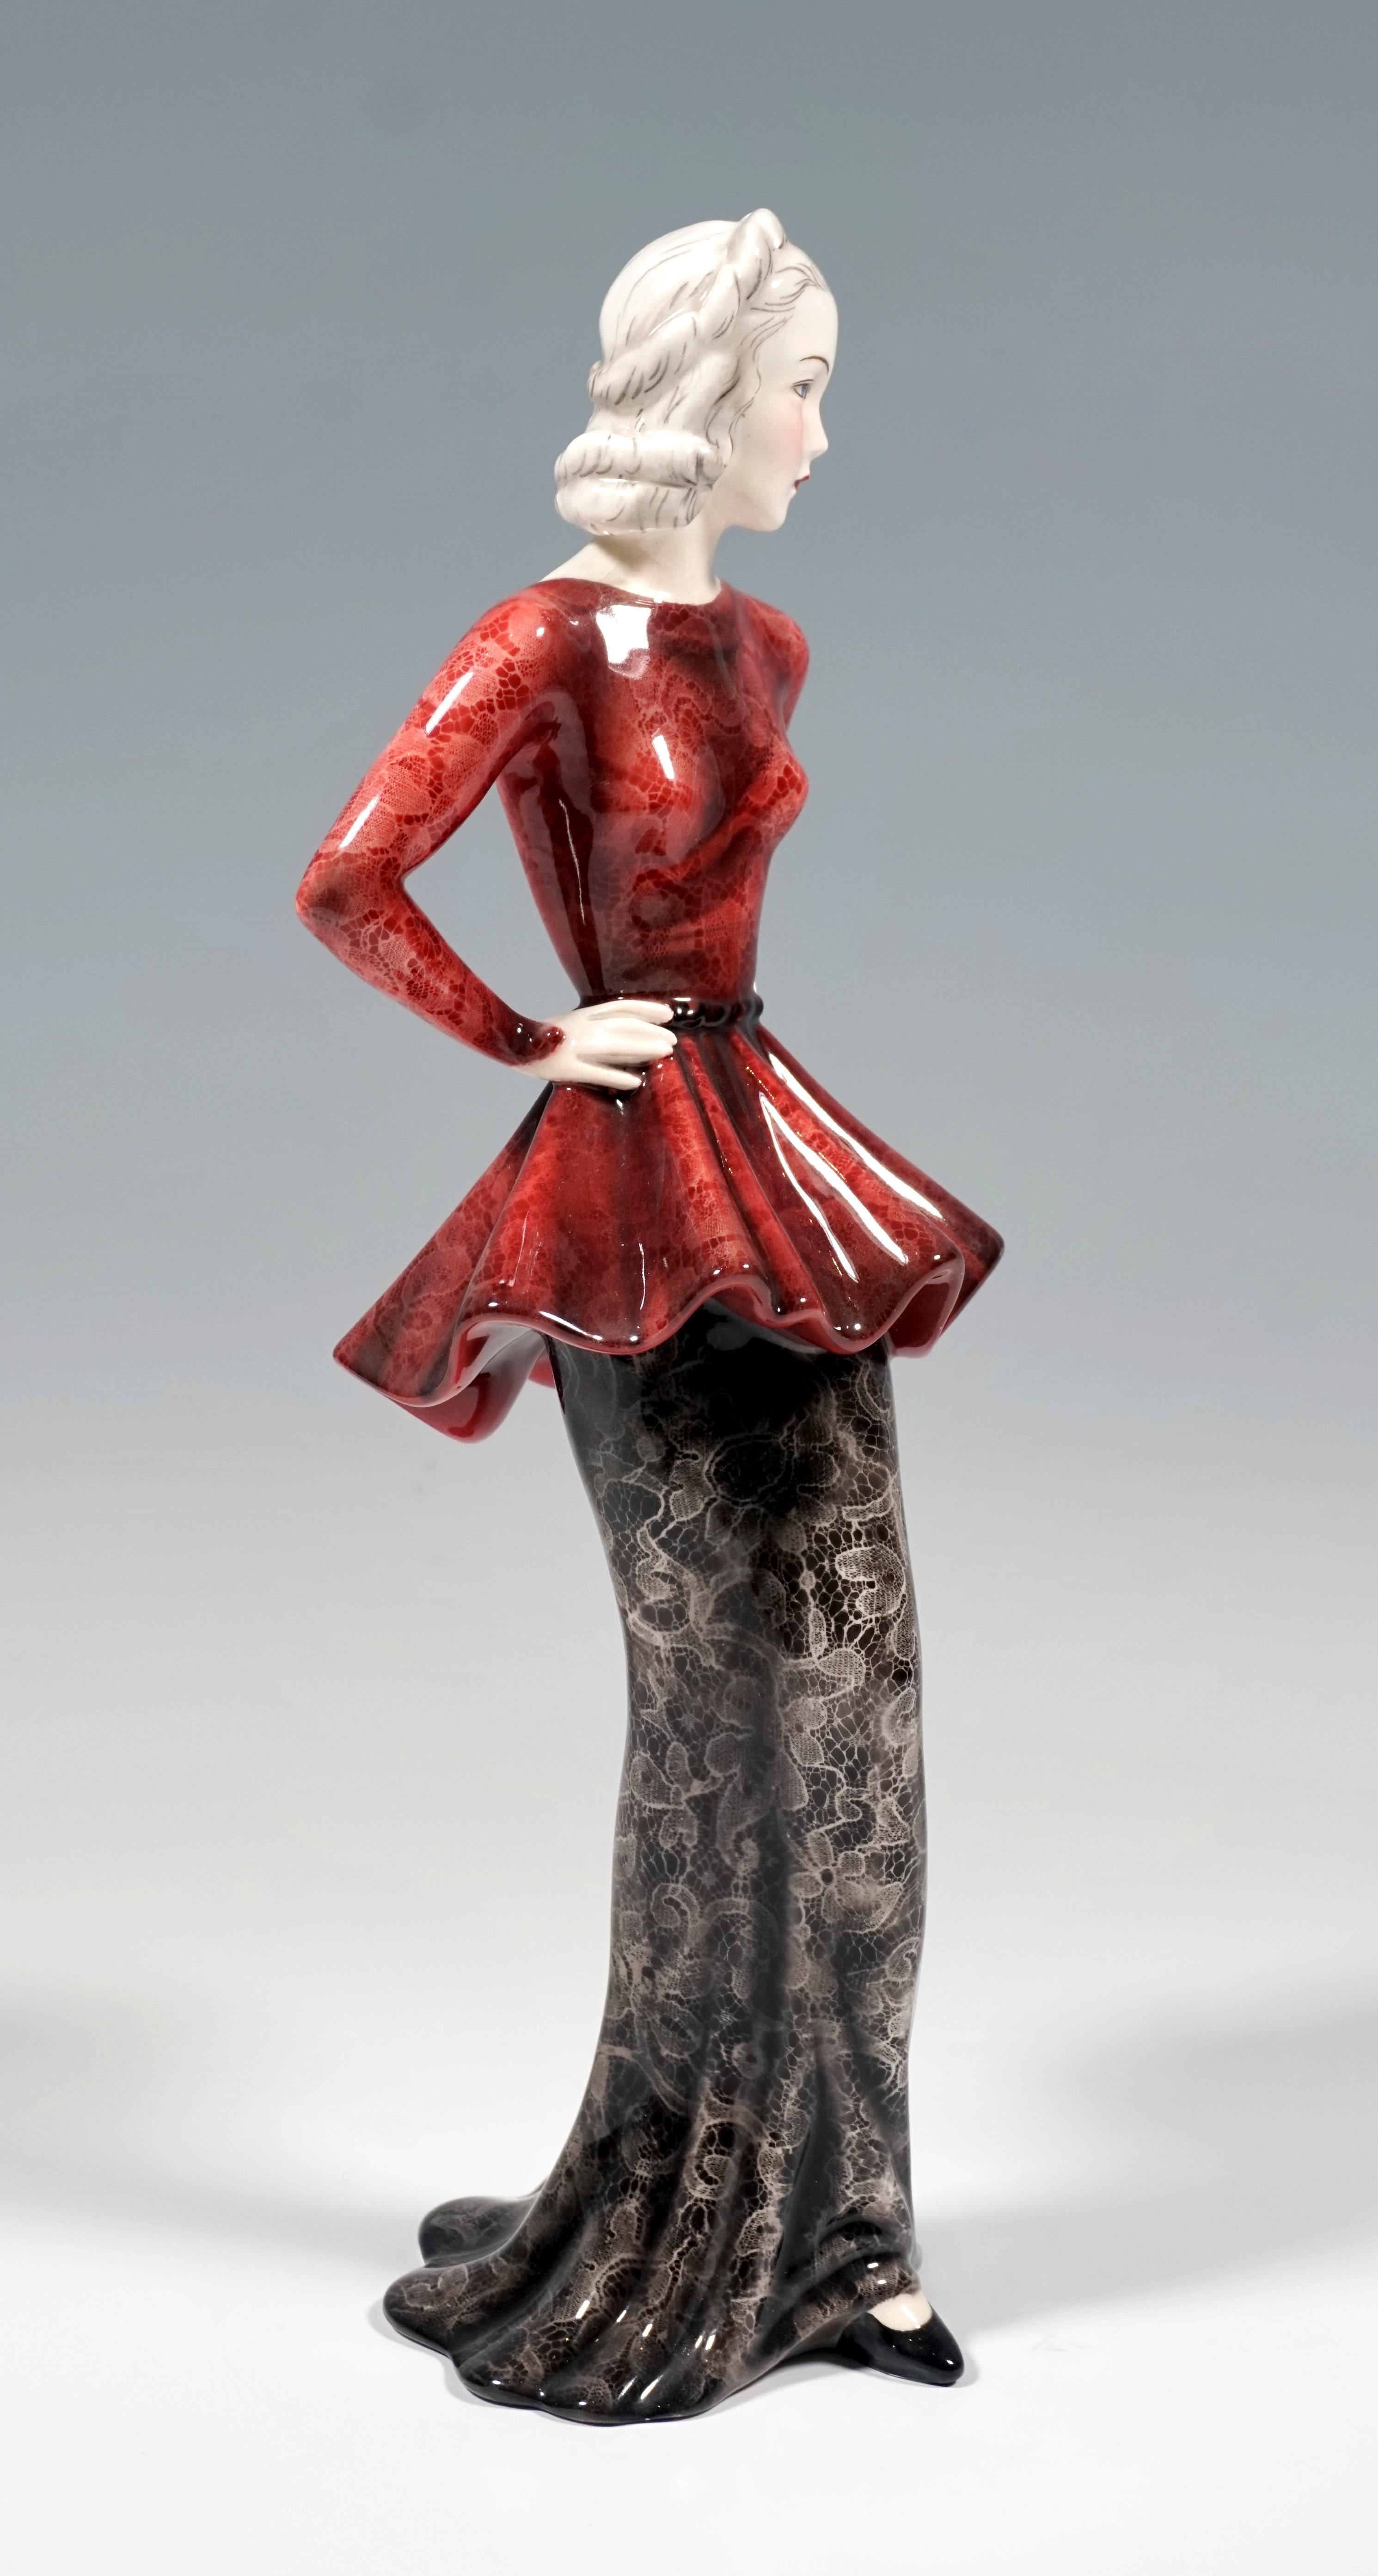 Depiction of Marlene Dietrich as a woman of fashion in a long, narrow lace skirt in black with a red, low-cut, waisted top, her arms on her hips. Her pointed black shoe protrudes from under the robe in front.
The figure is based on the skirt hem